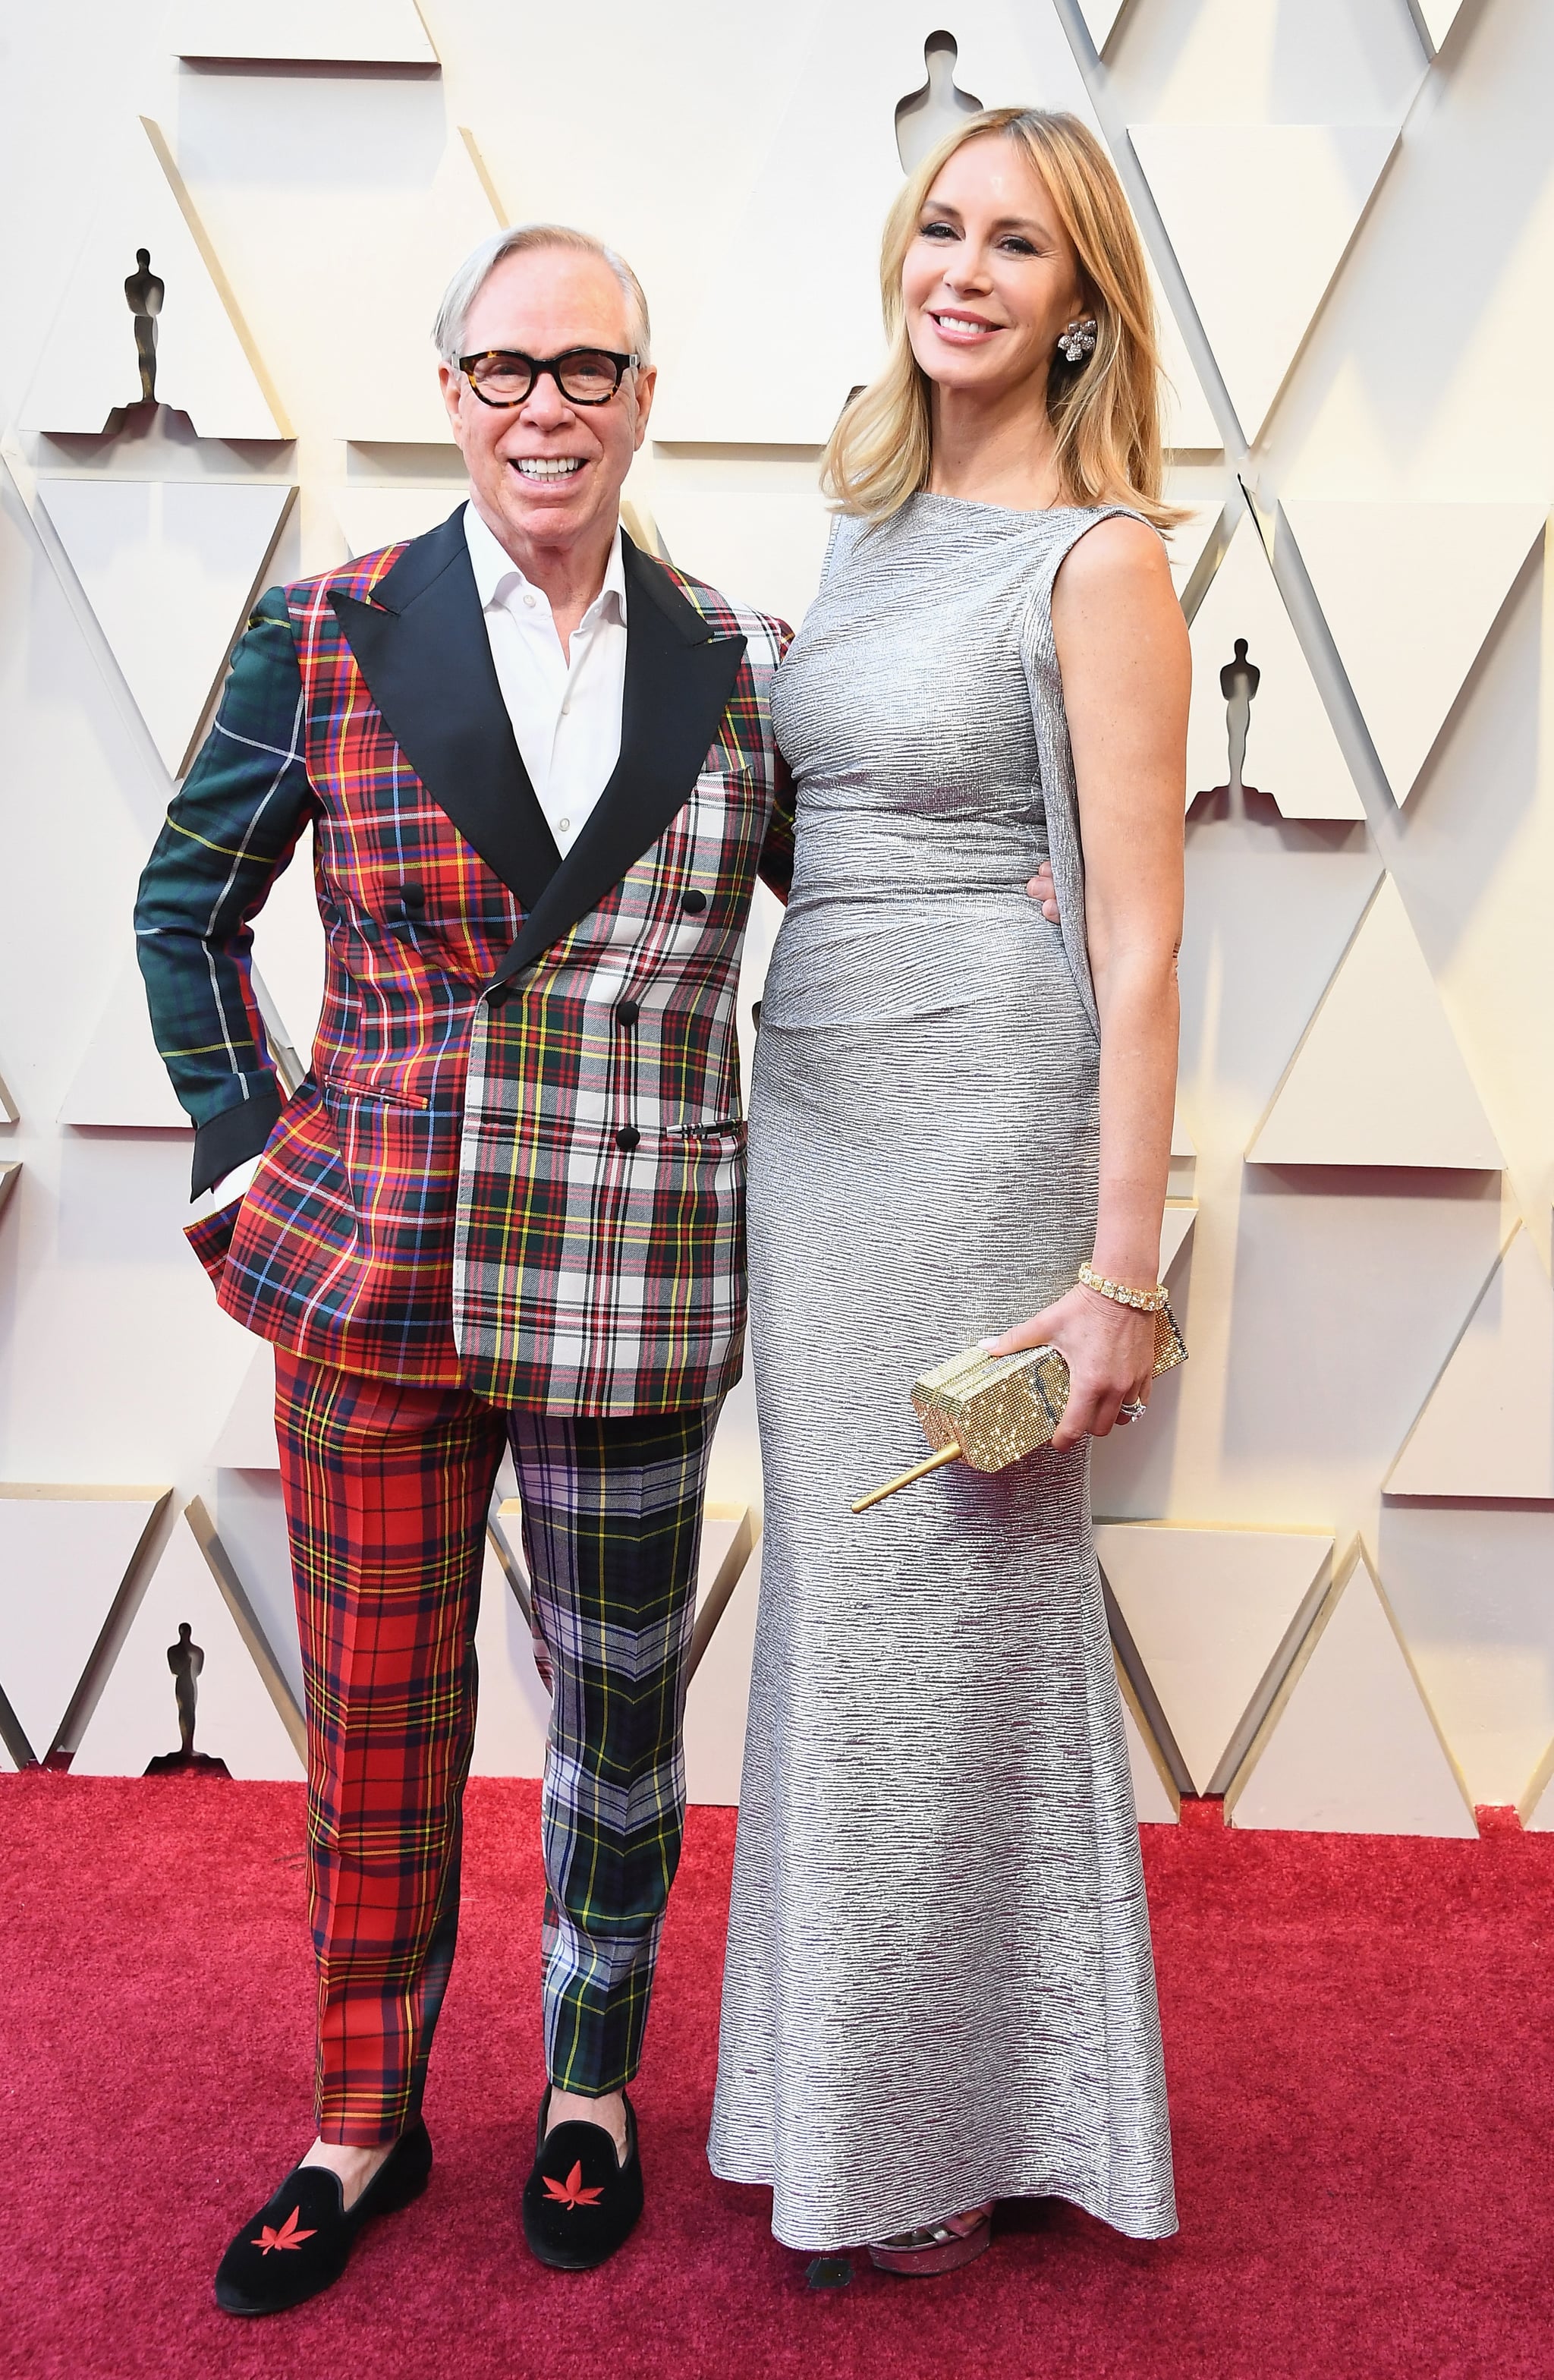 Tommy Hilfiger and Dee Ocleppo at the 2019 Oscars | All the Lust-Worthy Celebrity Moments From This Year's Award Season | POPSUGAR Fashion Photo 319